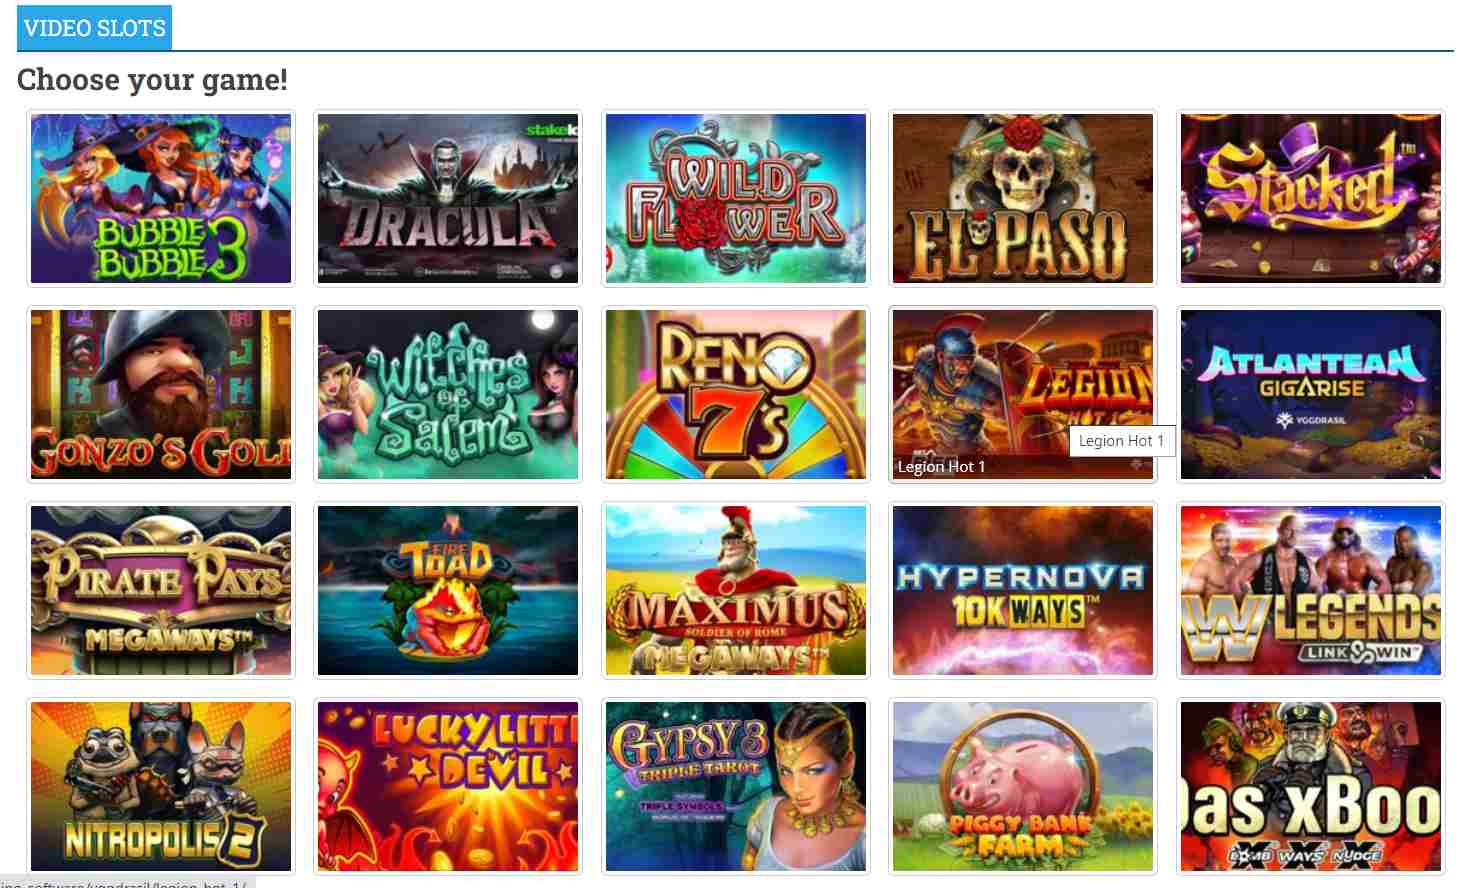 Variety of Video Slots to Play